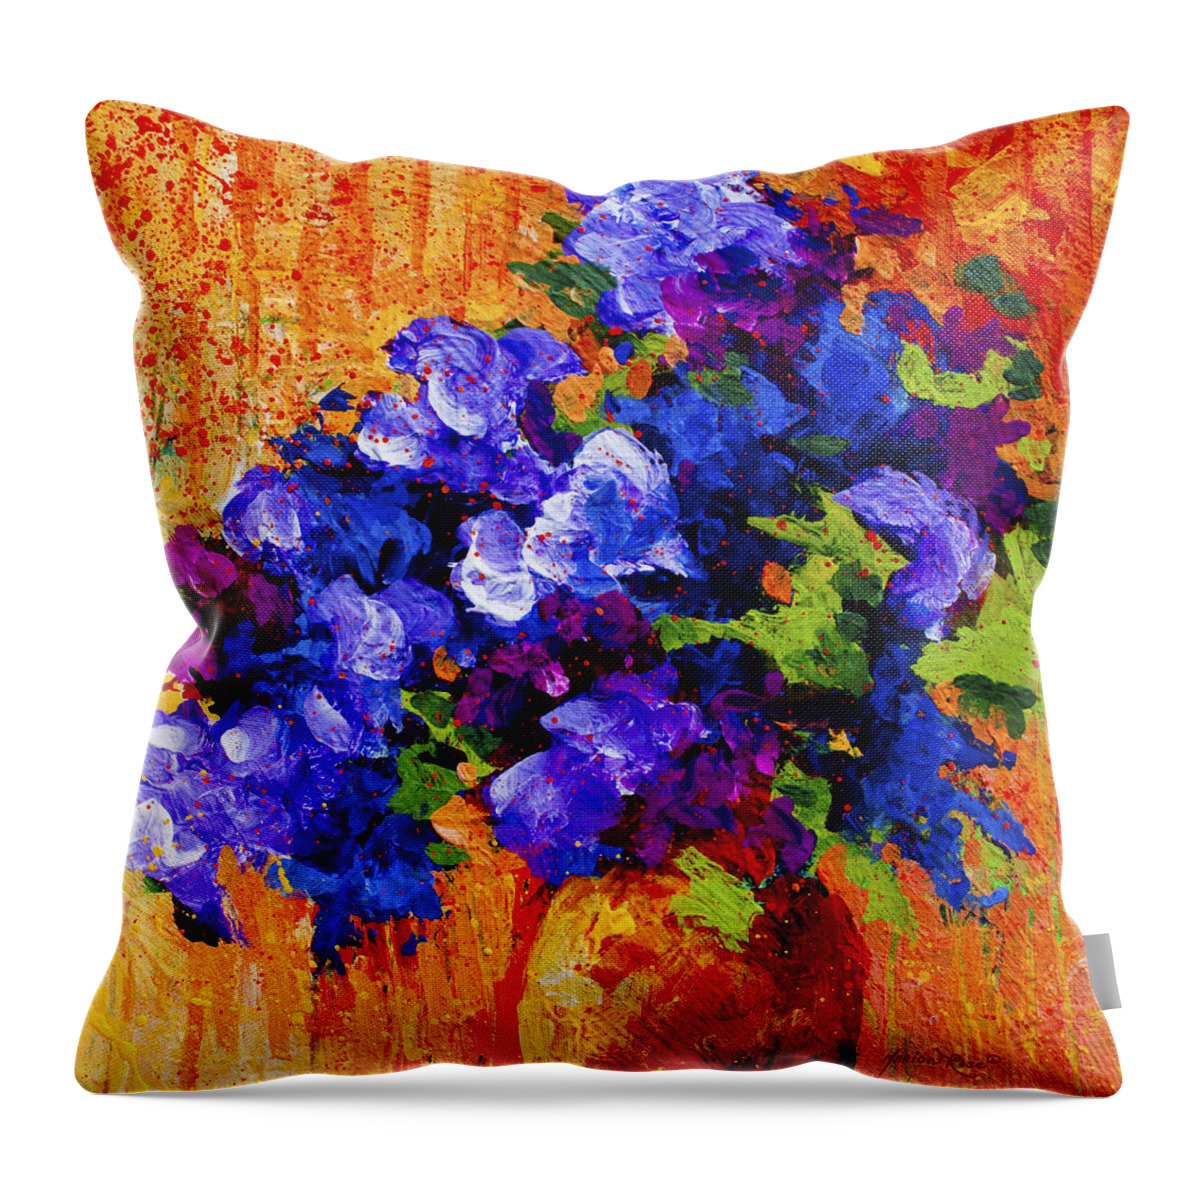 Floral Throw Pillow featuring the painting Abstract Boquet 3 by Marion Rose